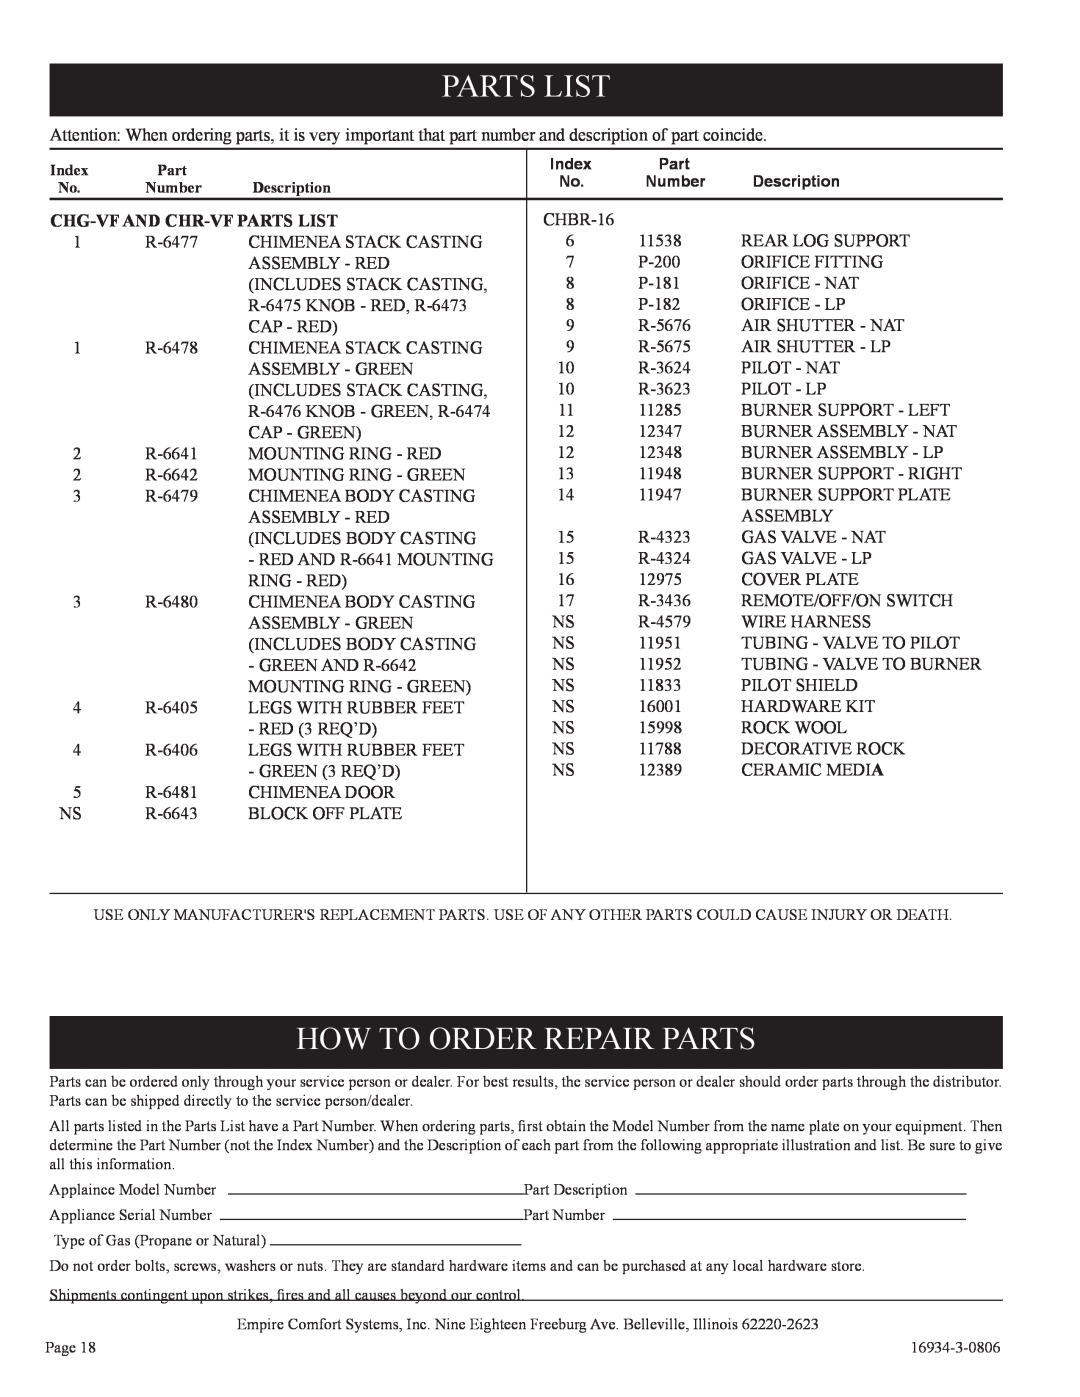 Empire Comfort Systems CHBR-16-3 Parts List, How To Order Repair Parts, Chg-Vfand Chr-Vfparts List 